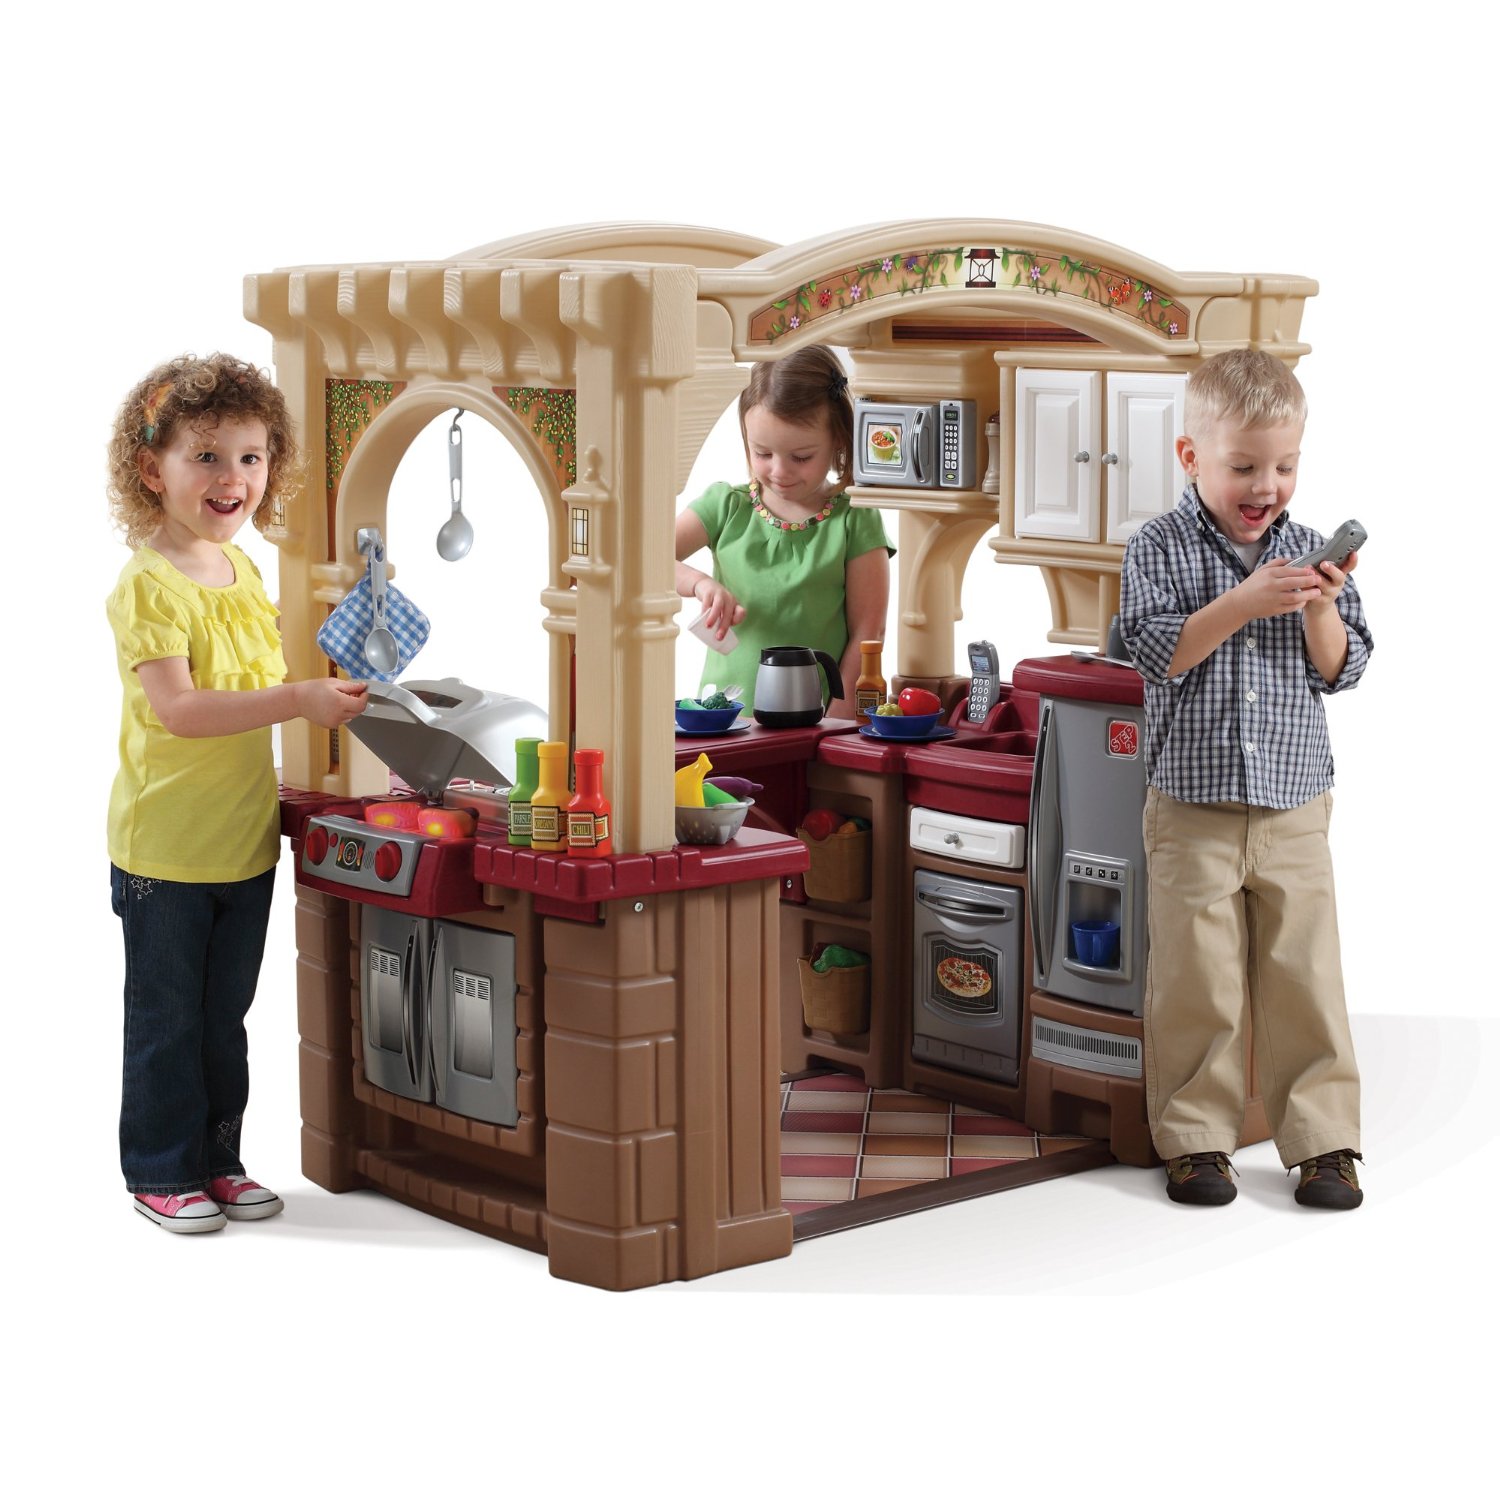 Plastic Indoor/Outdoor Playsets & Playhouses for Toddlers